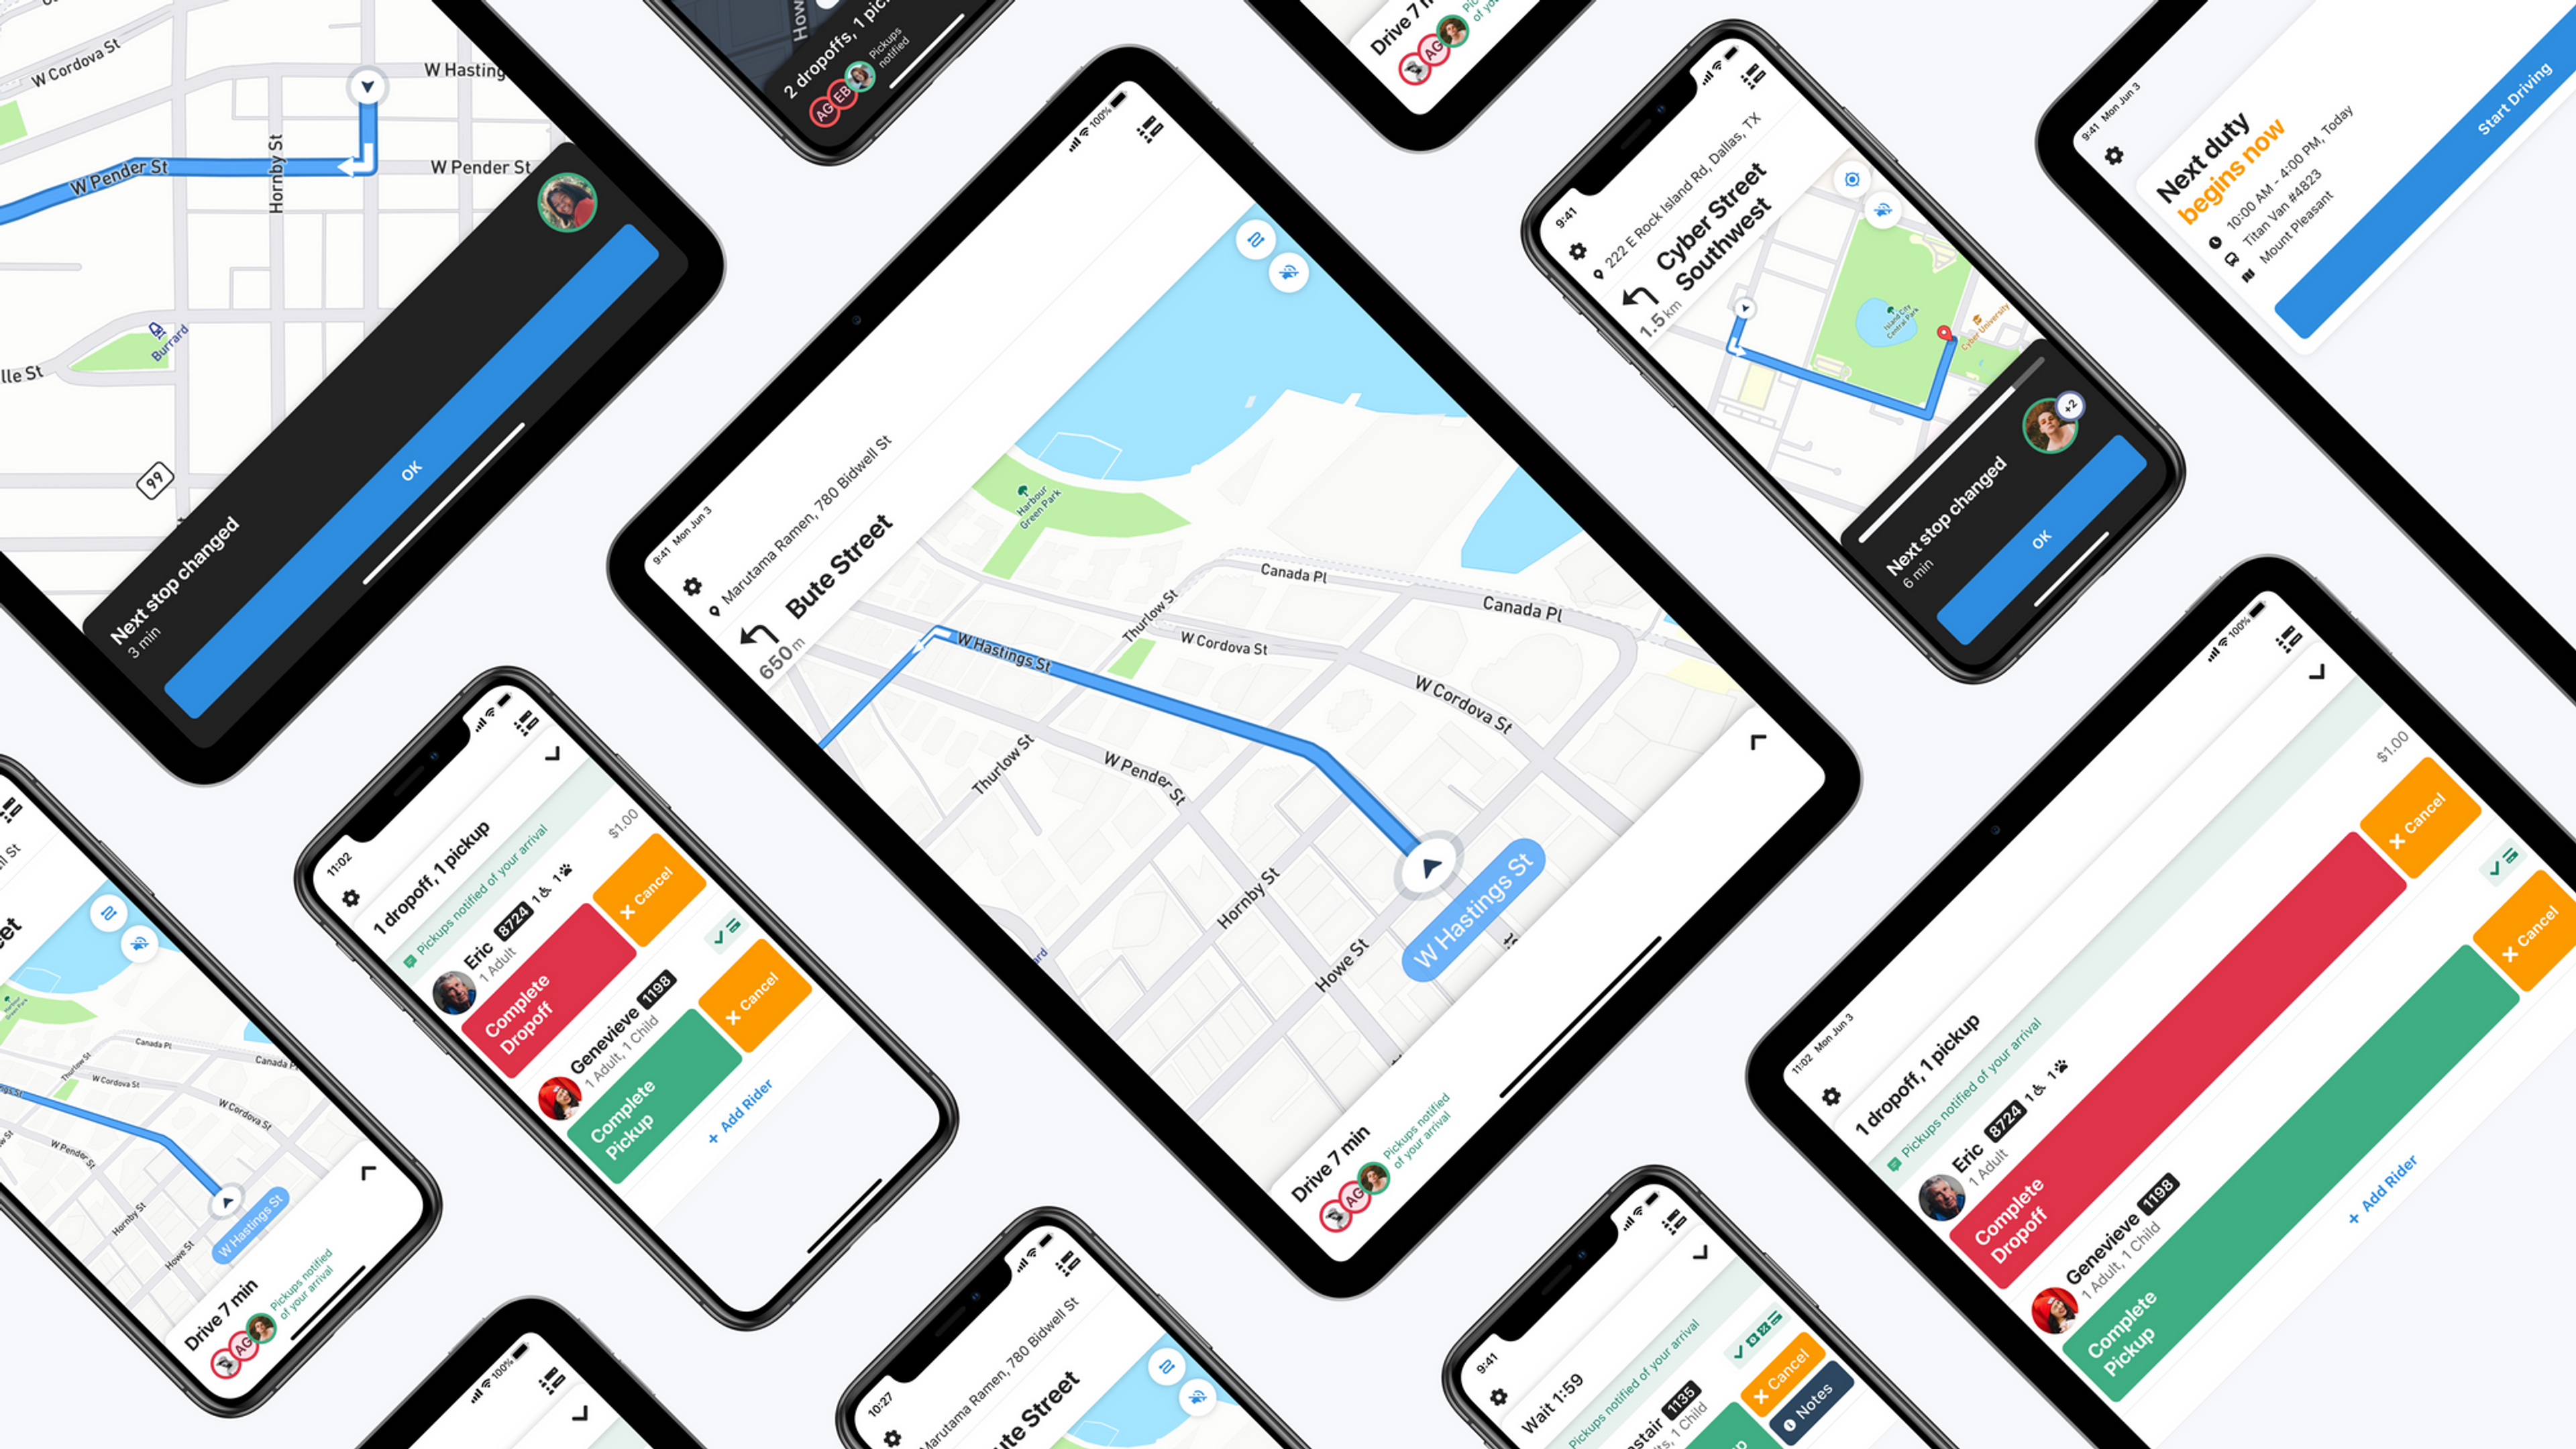 Today we're incredibly excited to announce the launch of Spare Driver 2.0, the first major revision to the experience of driving on-demand using Spare. It's available today and we're rolling it out to all of our customers over the next few weeks.